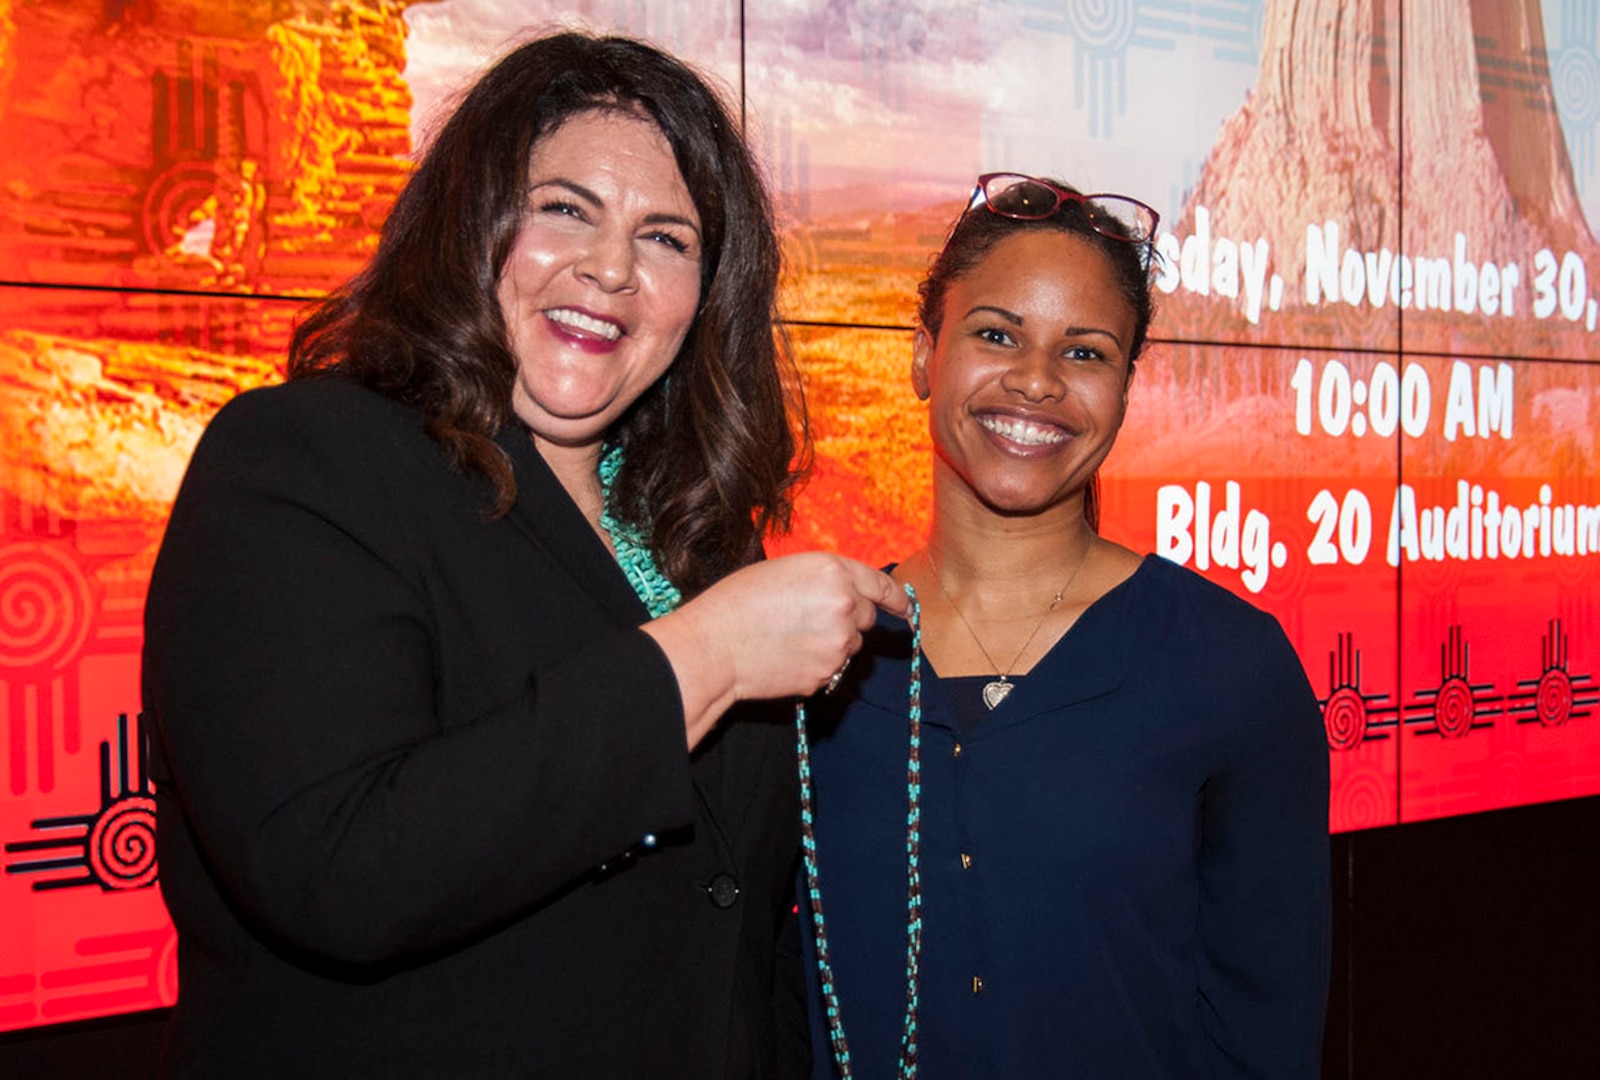 Stacey Halfmoon (left), director of American Indian Relations for the Ohio History Connection, holds a hand-woven turquoise necklace presented to her by Caroline Watson (right), chair of DLA Land and Maritime’s Equal Employment Opportunity Native American Special Emphasis Program, on behalf of the Defense Federal Community. The "give-away" presentation came at the end of DSCC's National American Indian History Month observance Nov. 30.  